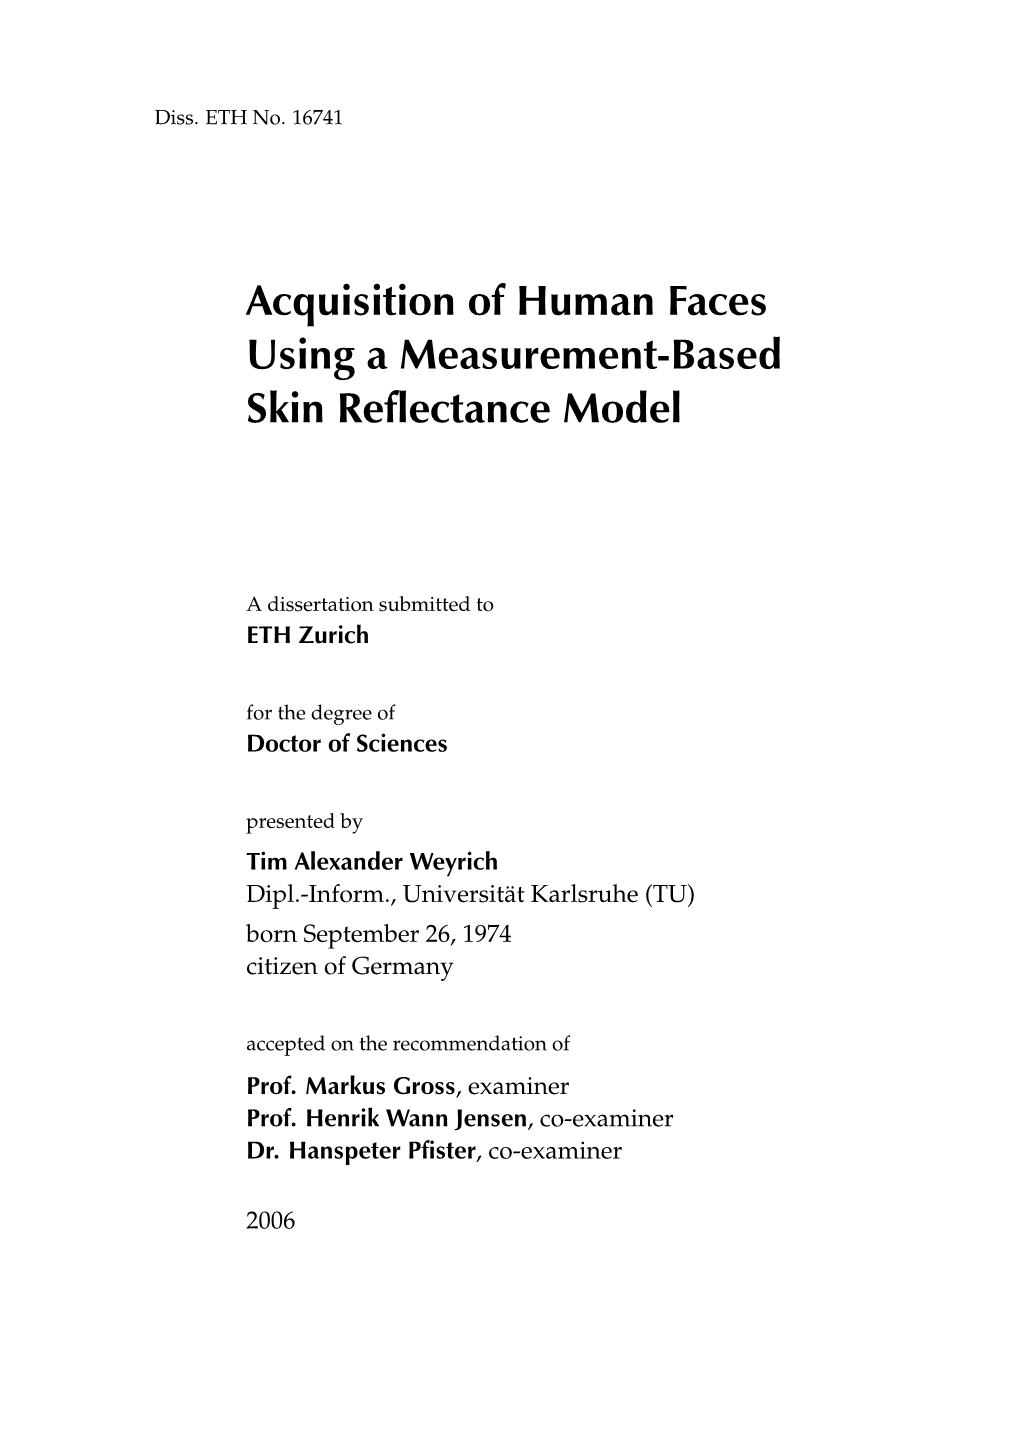 Acquisition of Human Faces Using a Measurement-Based Skin Reflectance Model